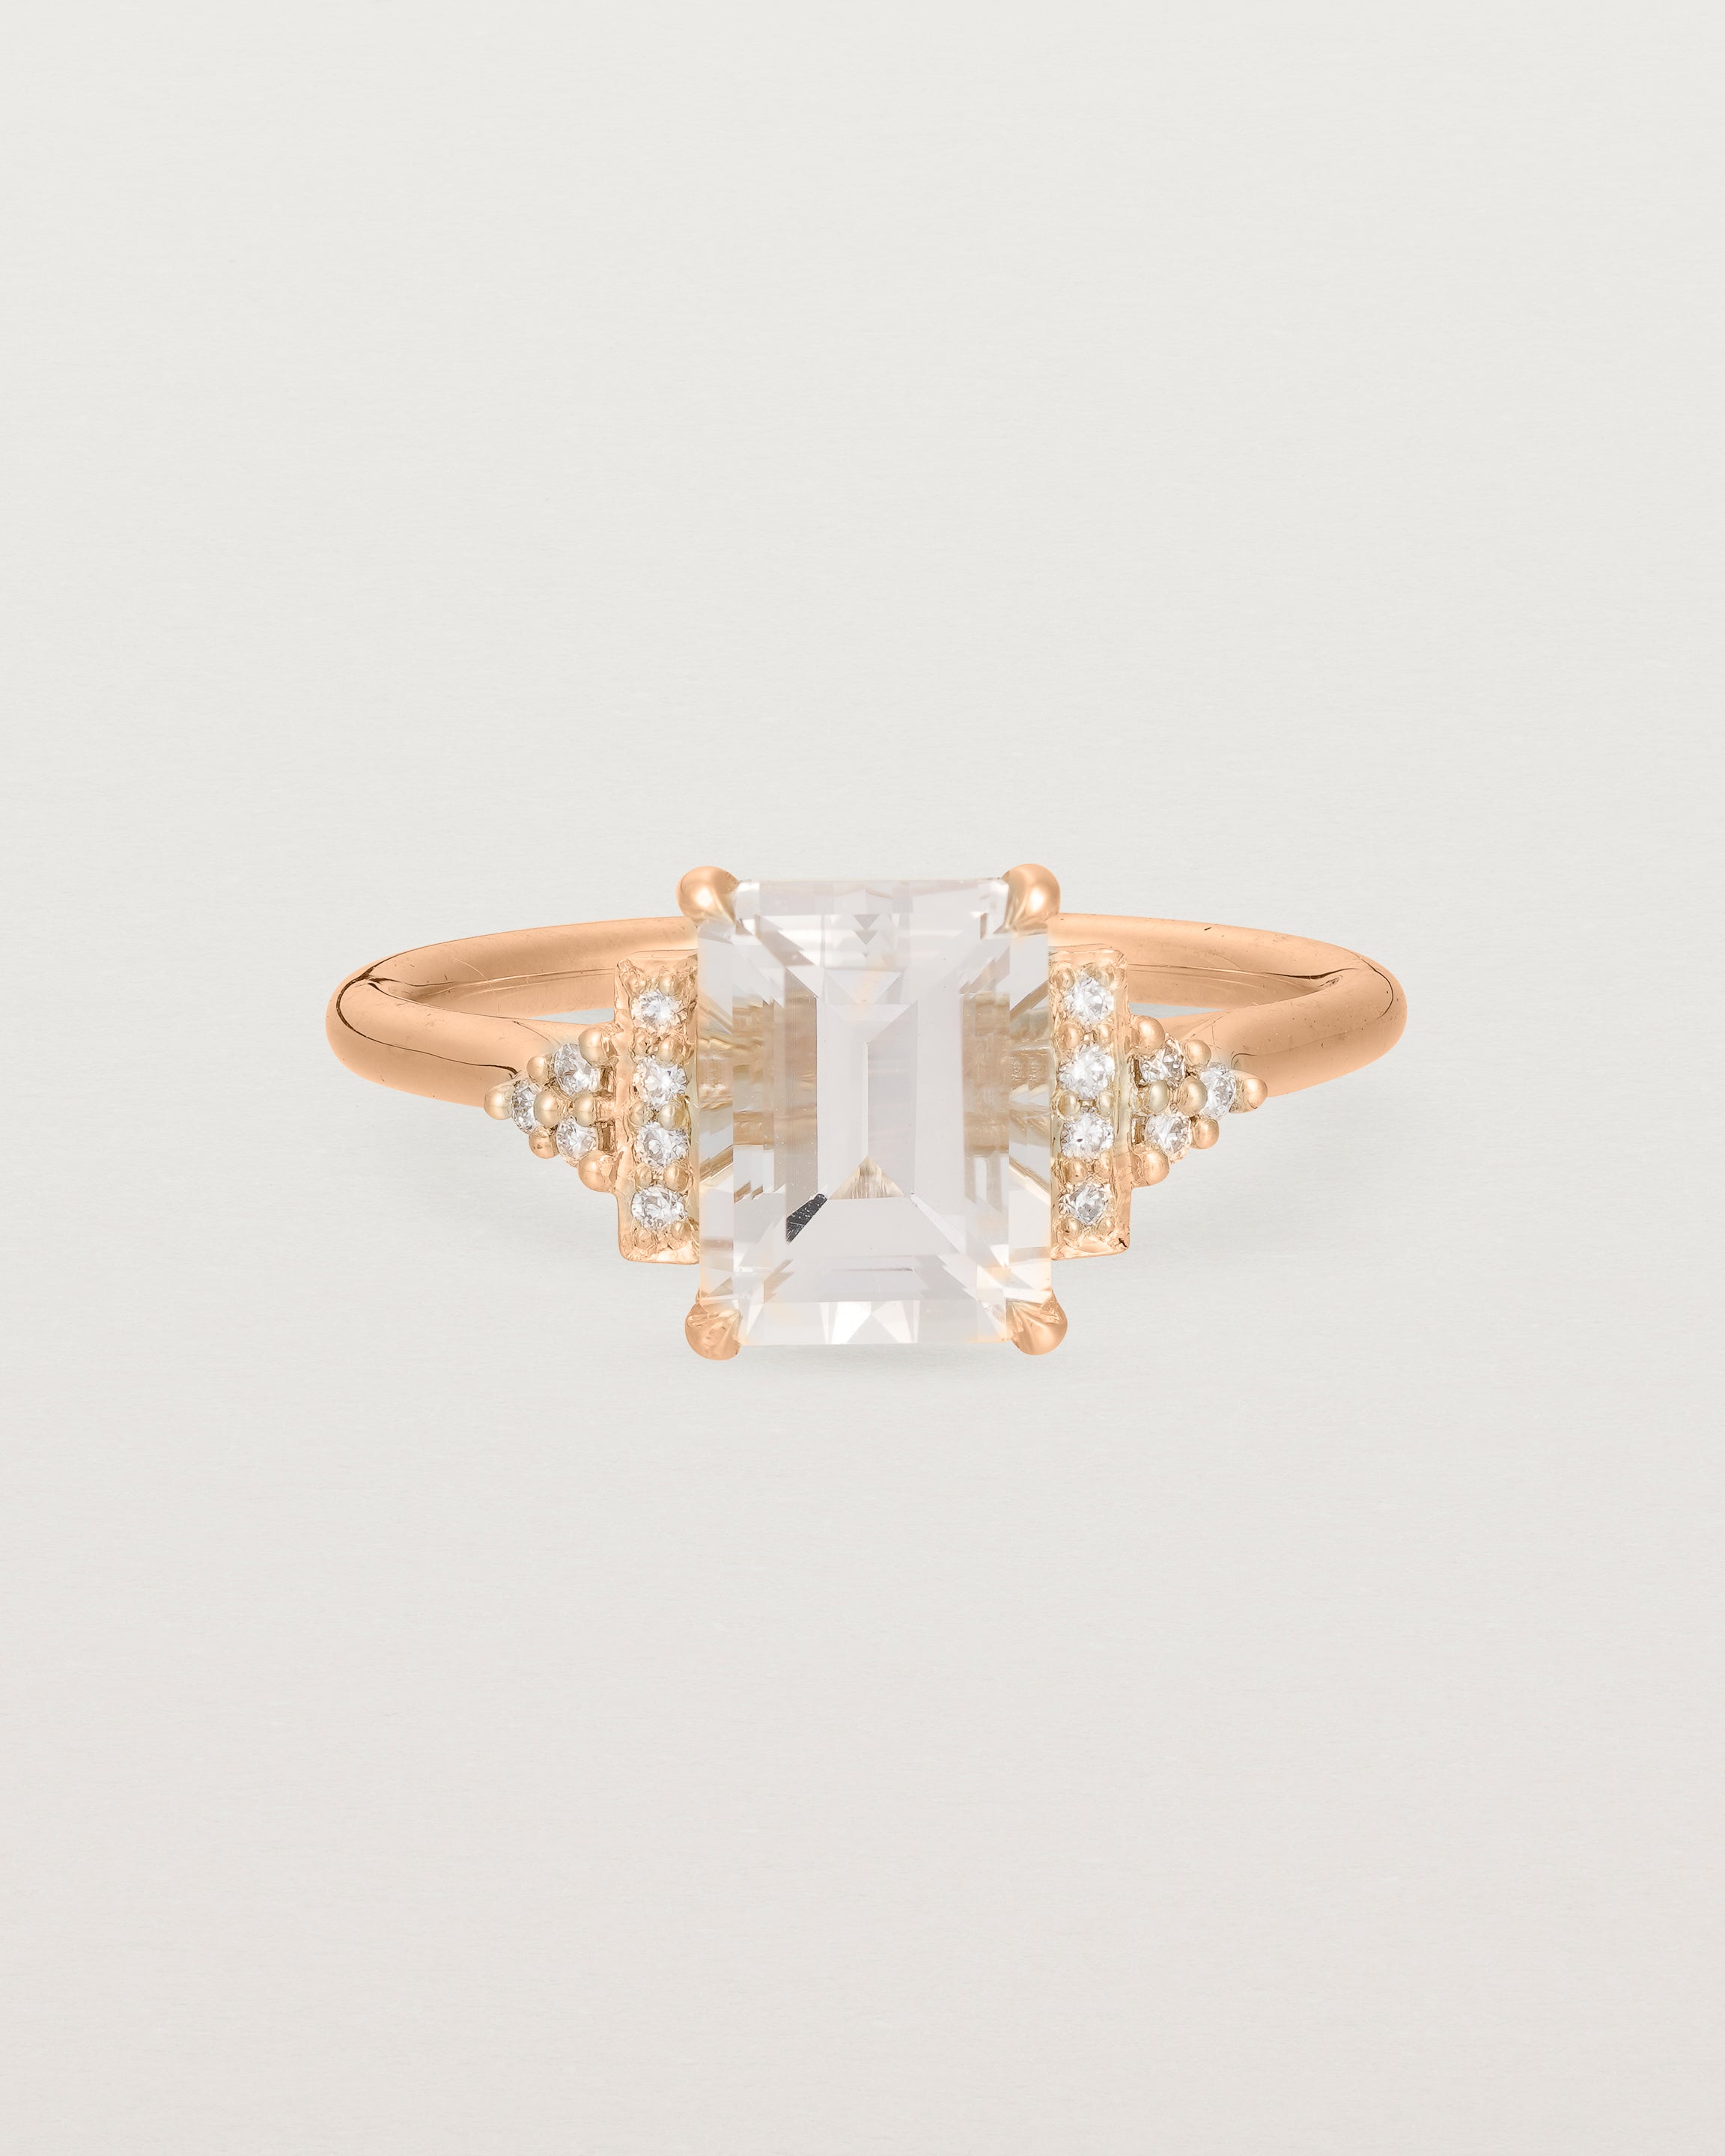 Front view of the Elodie Ring featuring a pale pink emerald cut morganite in rose gold